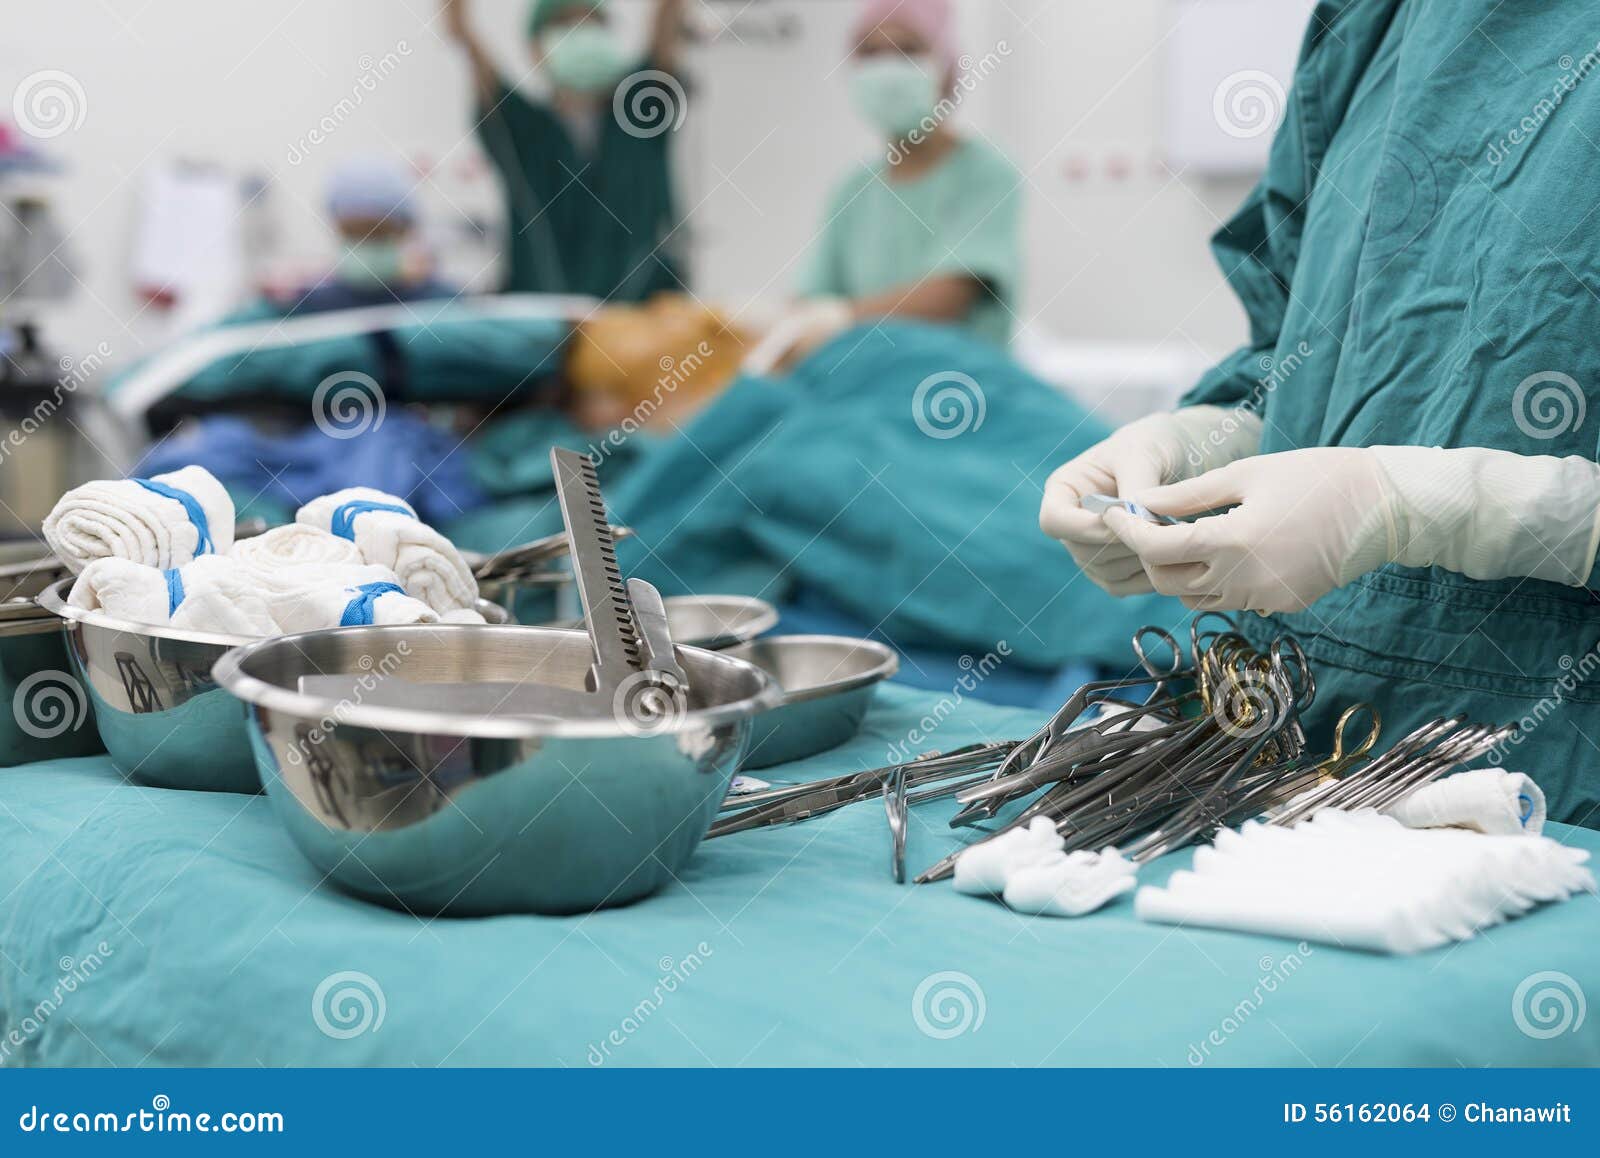 medical equipments for surgery